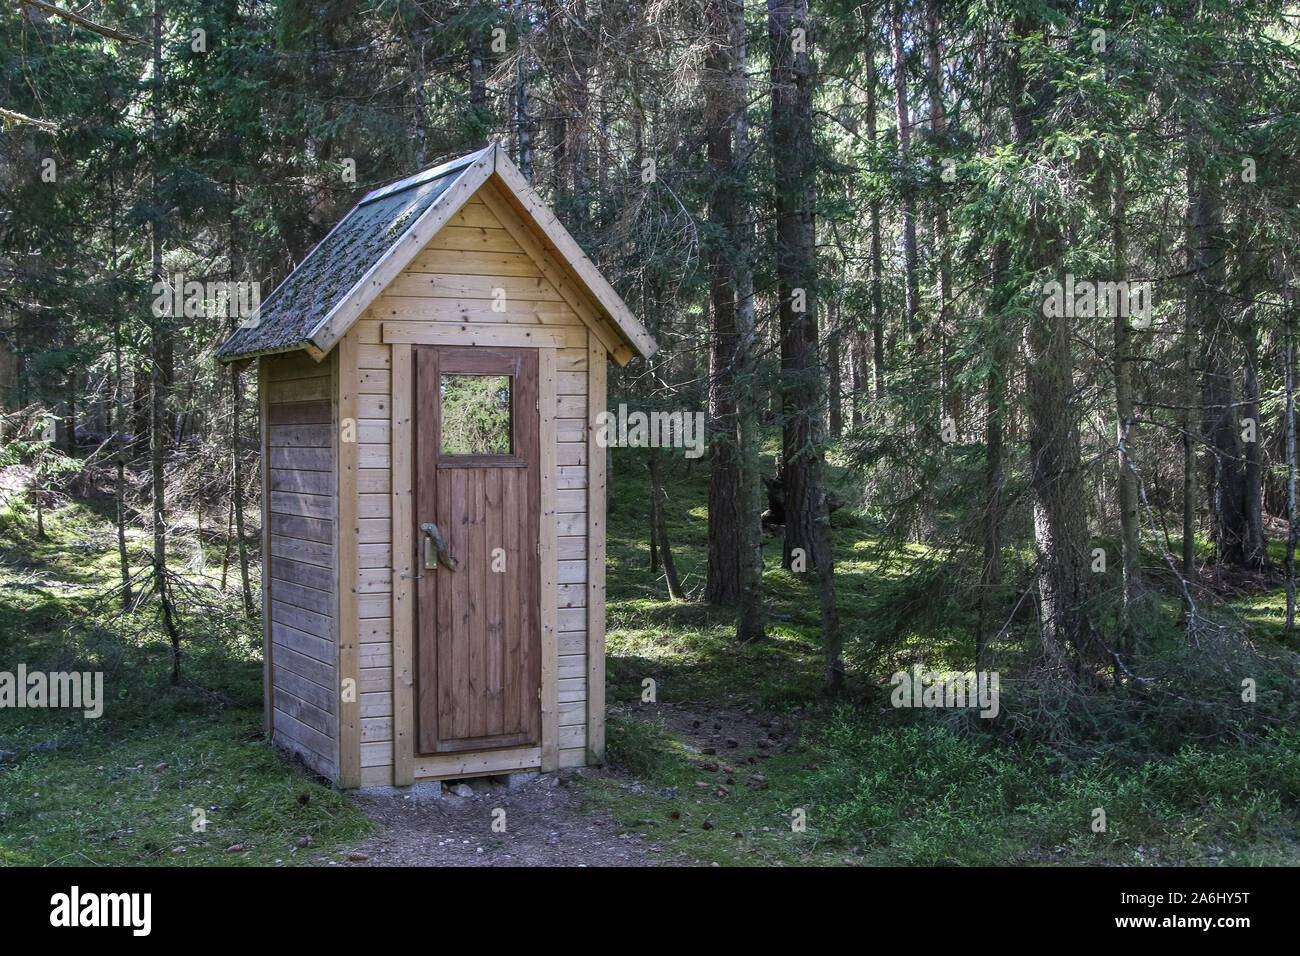 Outside privy (outhouse toilet) on RMK campsite on the Baltic sea coast is seen in Meiuste, Saaremaa Island Estonia, on 29 April 2019 Free of charge RMK campsites are set up for hikers and others travelling through the wilderness in Estonia. As a rule, they are located far from public roads and away from human settlement. Campsites are equipment with free firewood, fireplaces and toilets. © Michal Fludra / Alamy Live News Stock Photo